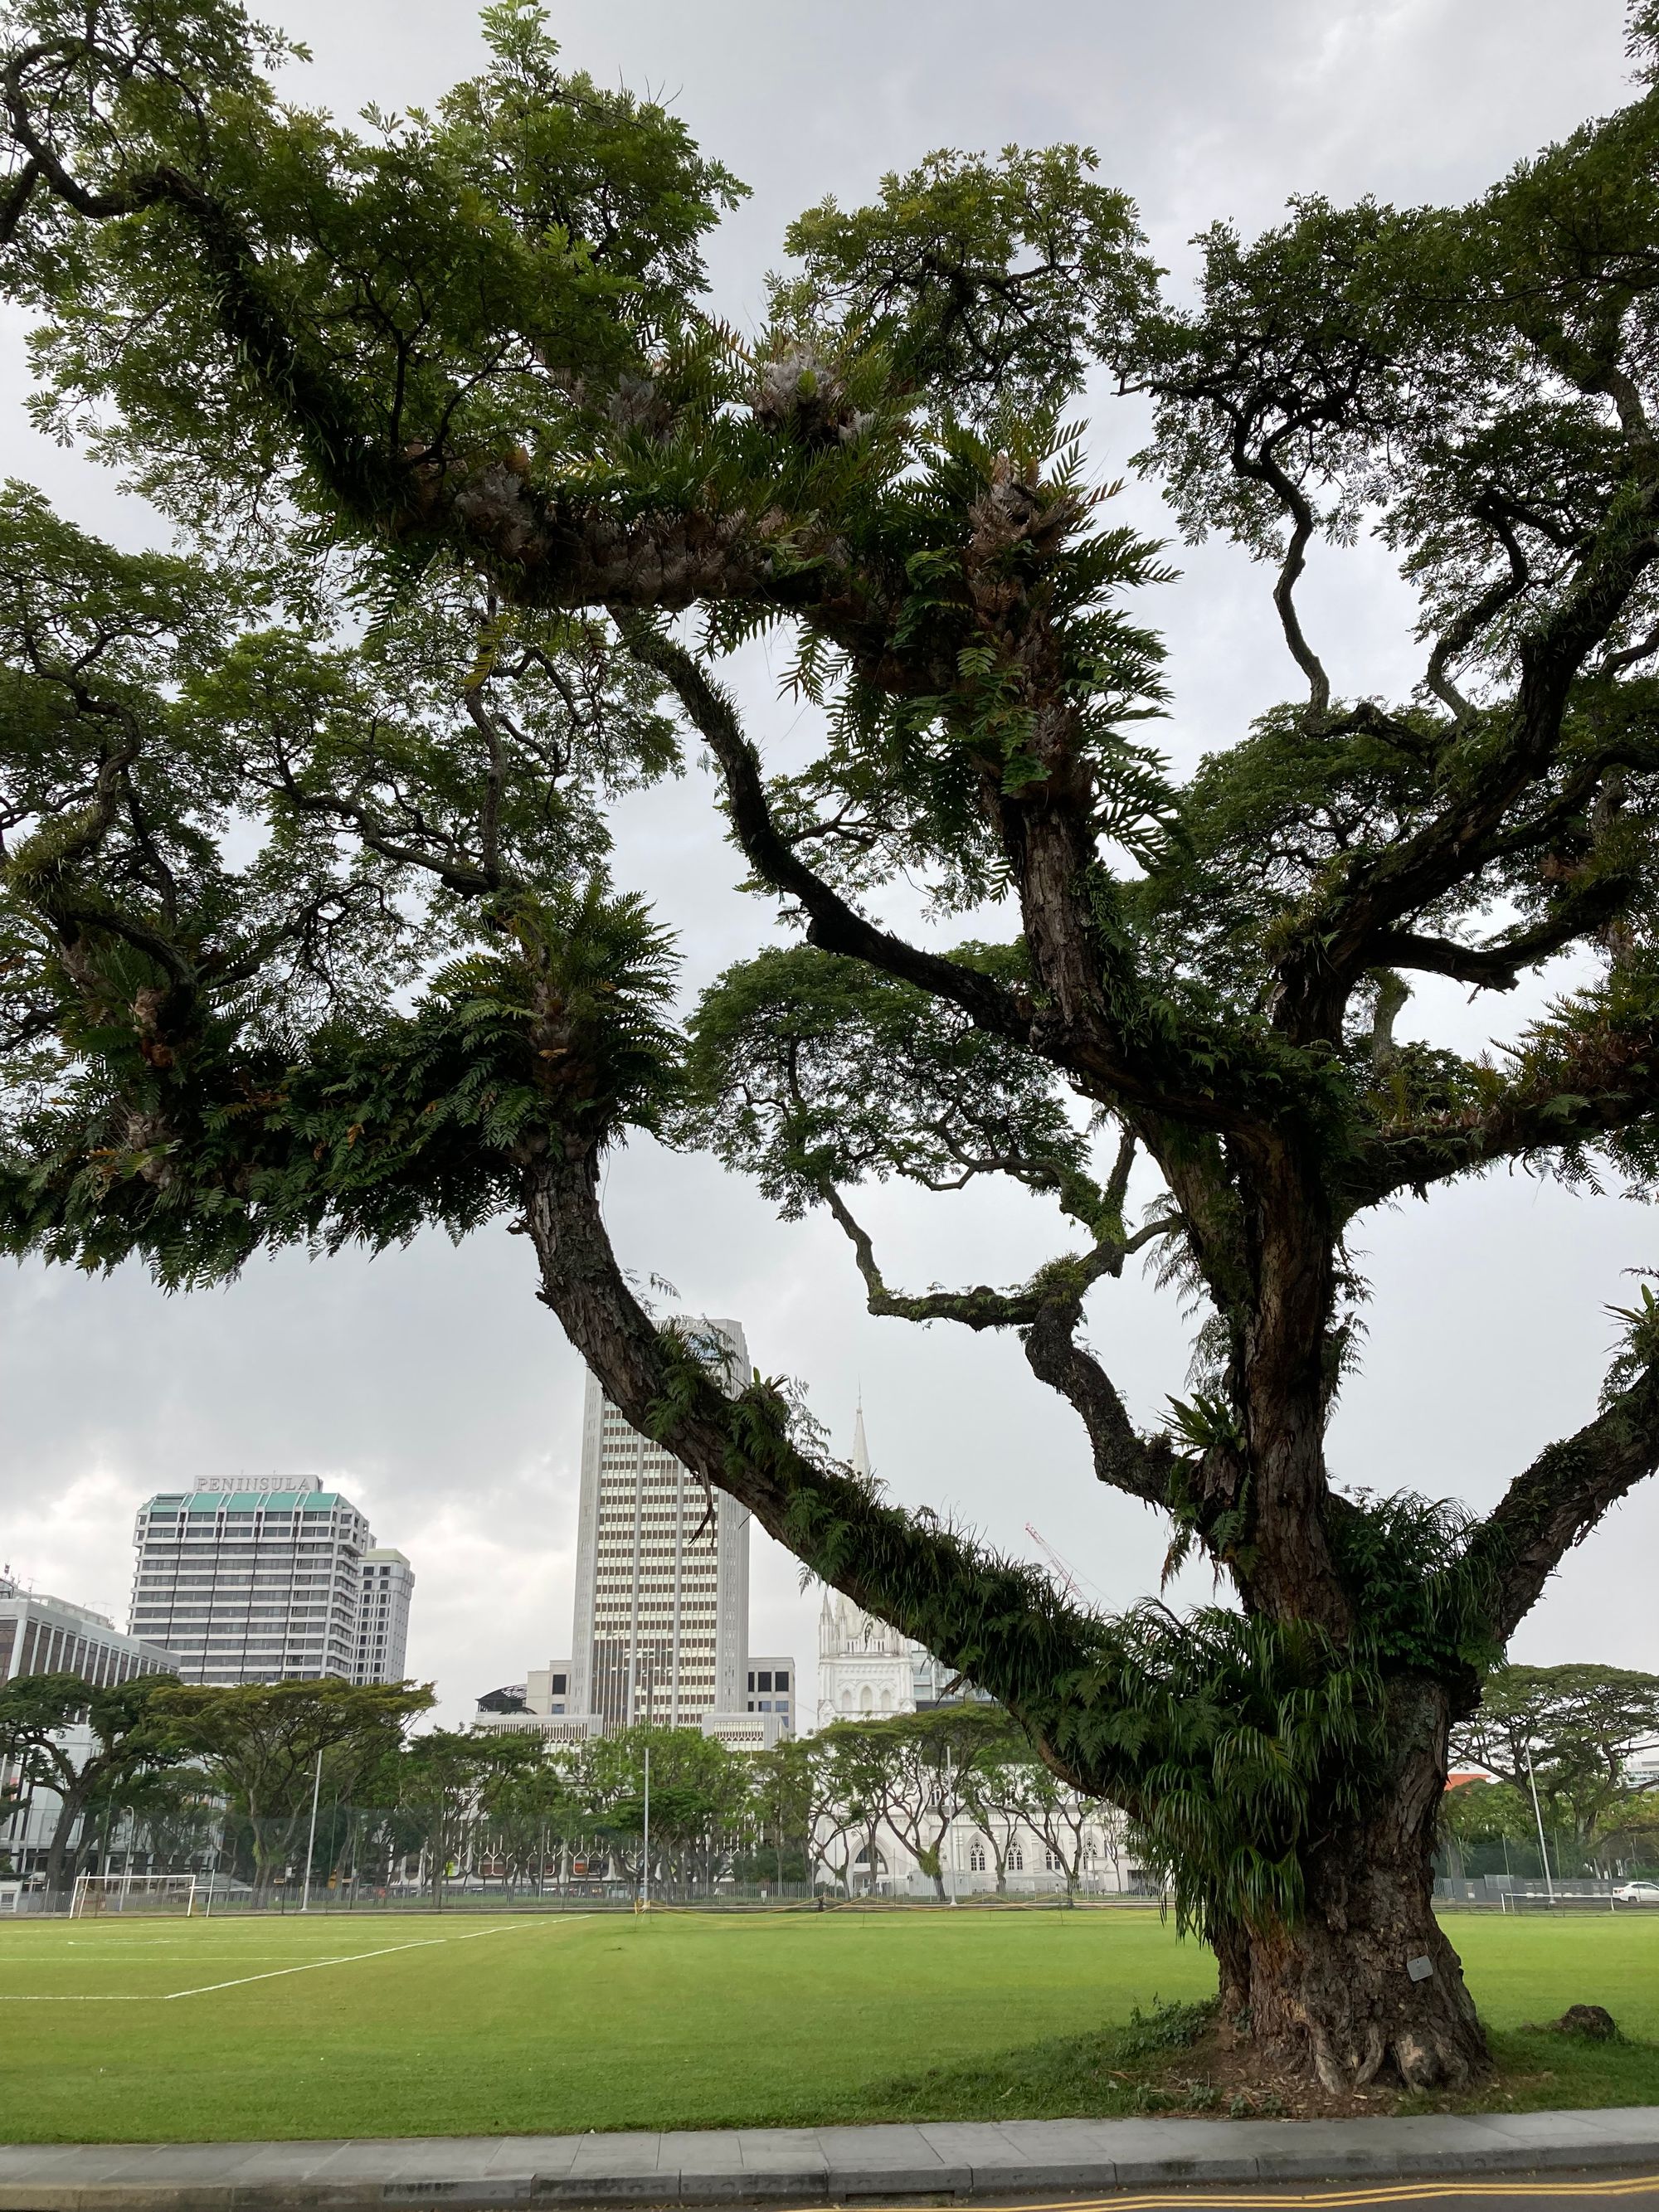 An old rain tree, its branches covered with ferns, stands dramatically by a green playing field, with a few tall buildings in the distance.